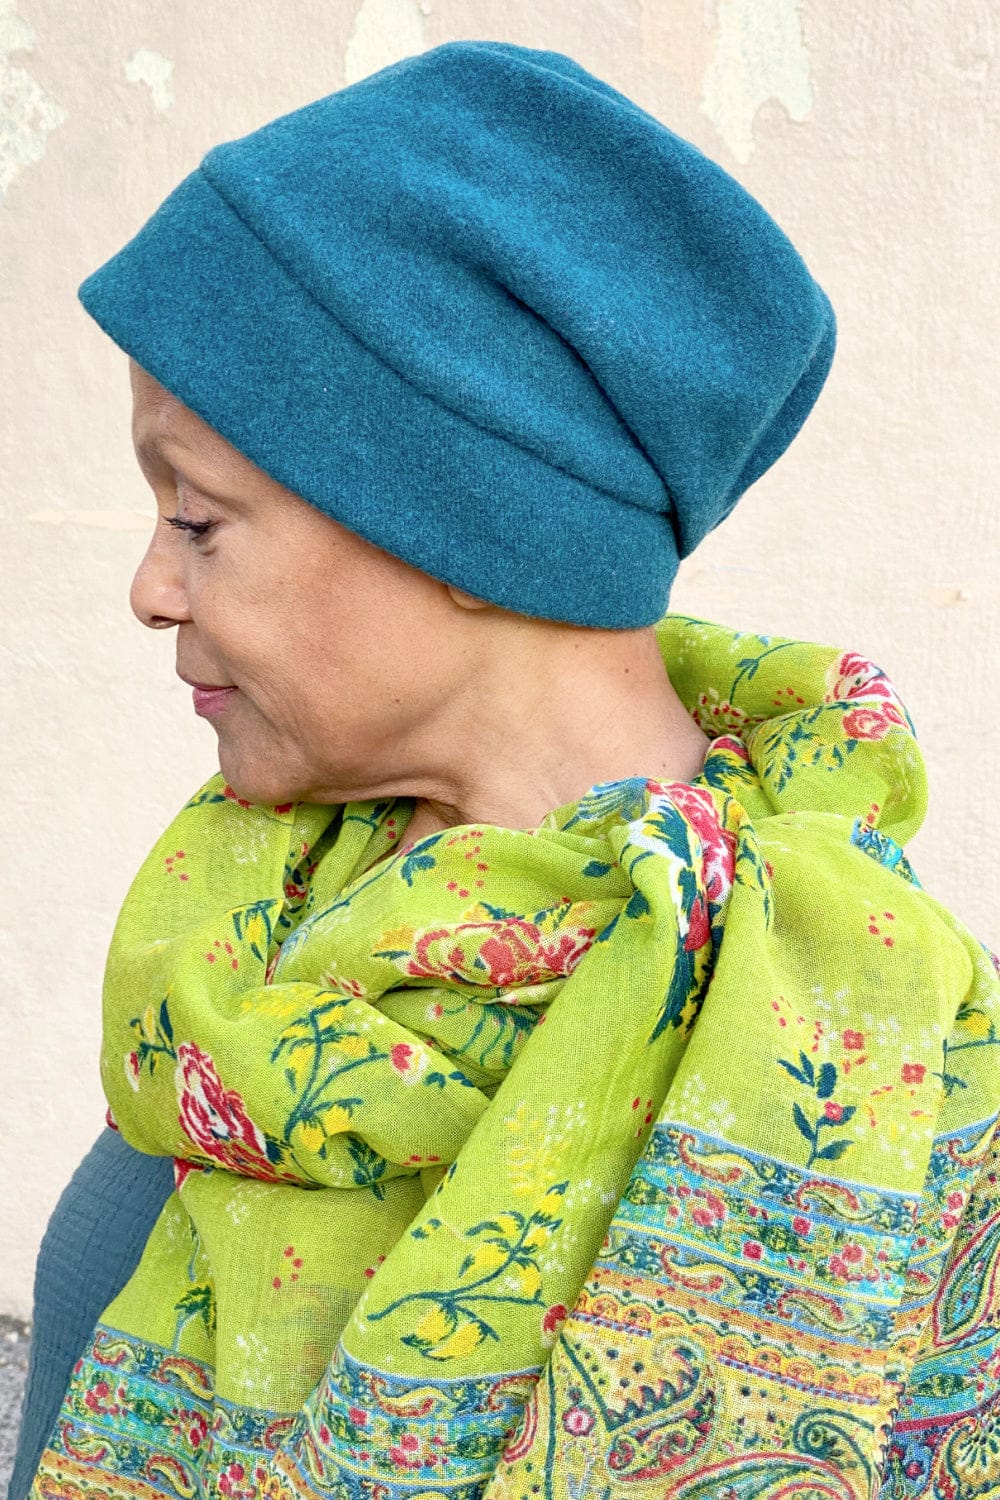 Chartreuse floral and paisly print paper wool scarf resting on the shoulders of an older woman. She is wearing a dark teal winter hat.